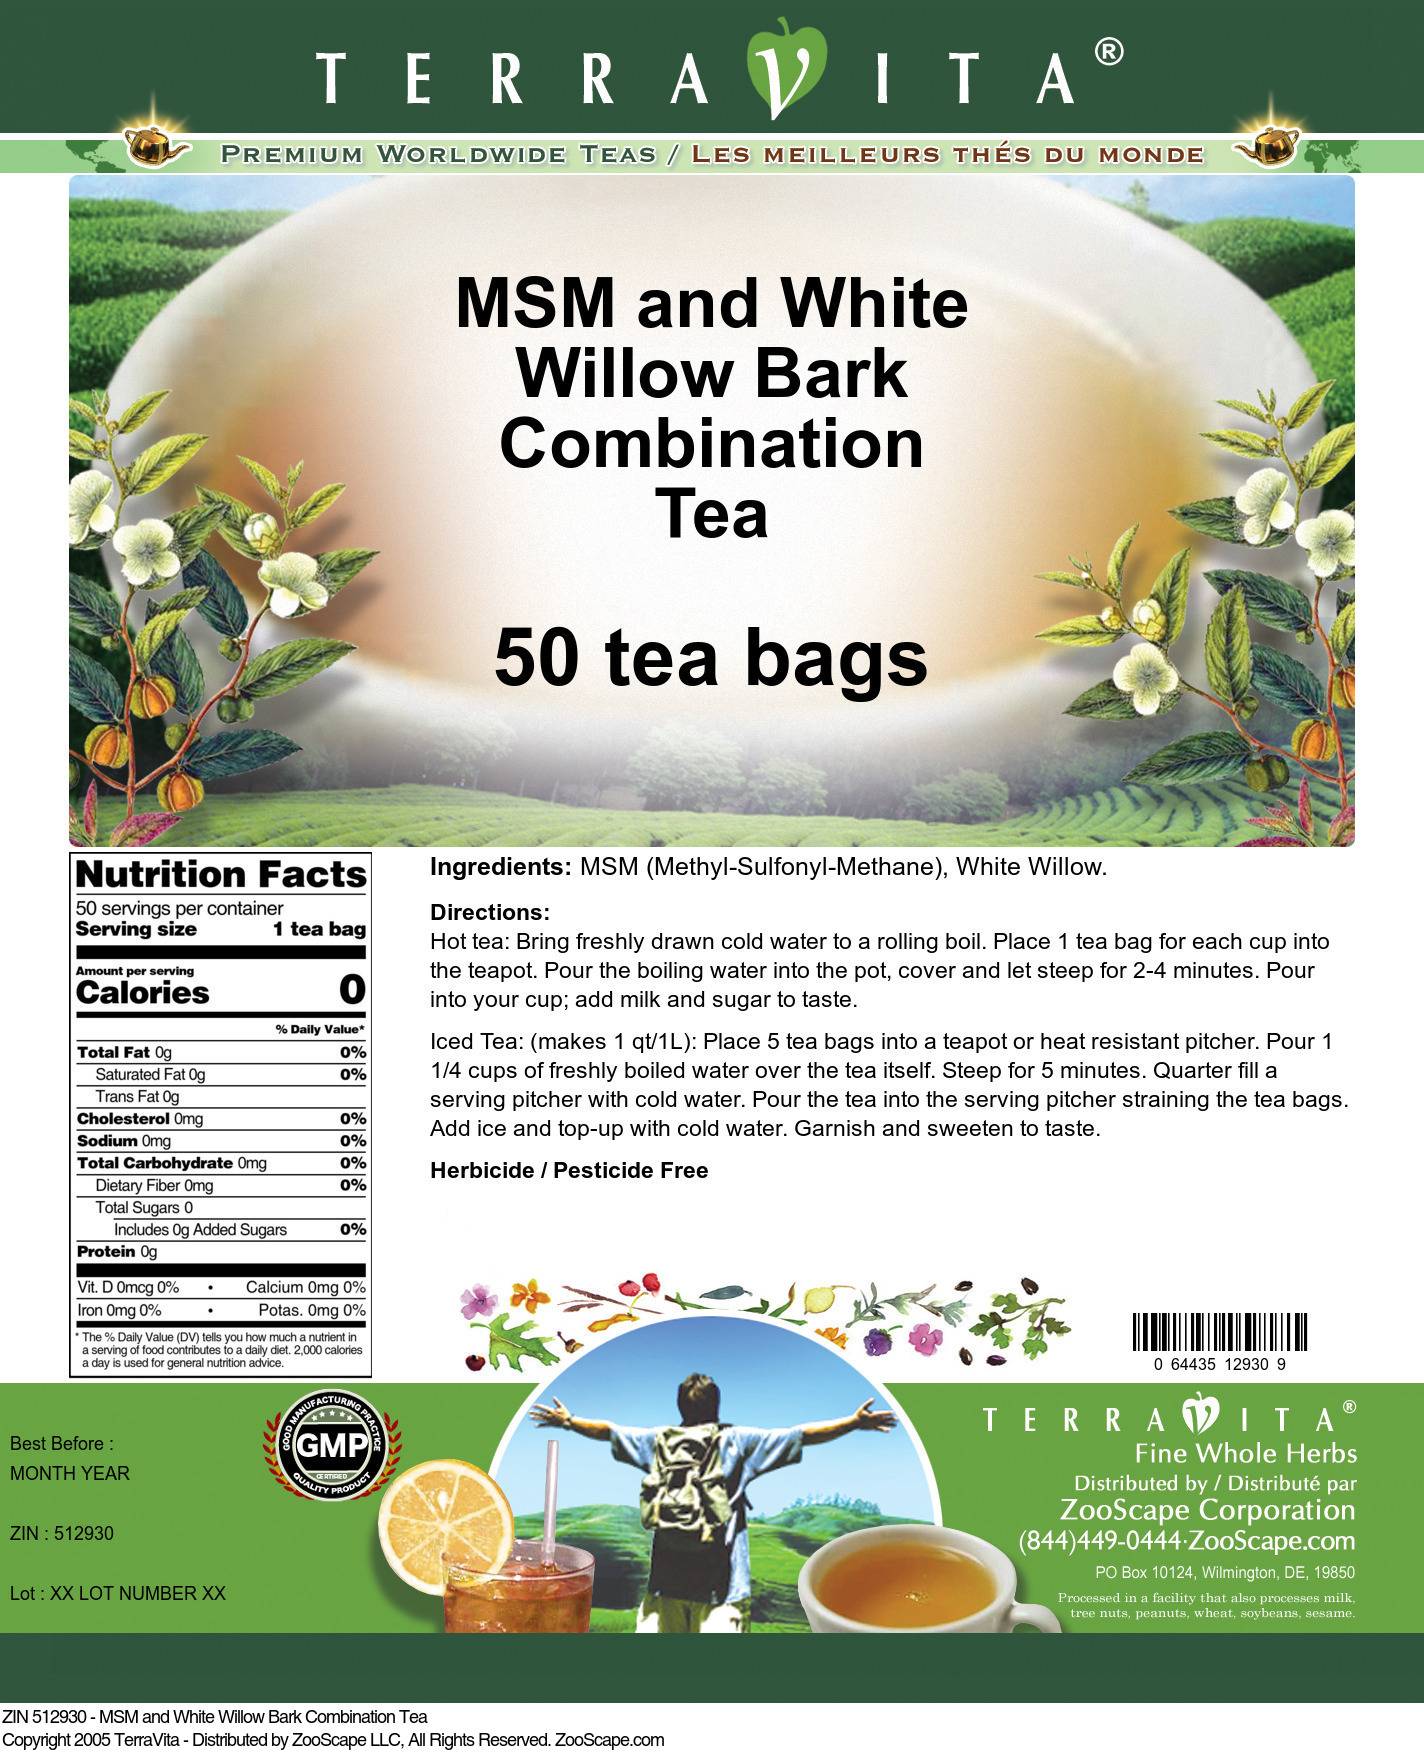 MSM and White Willow Bark Combination Tea - Label